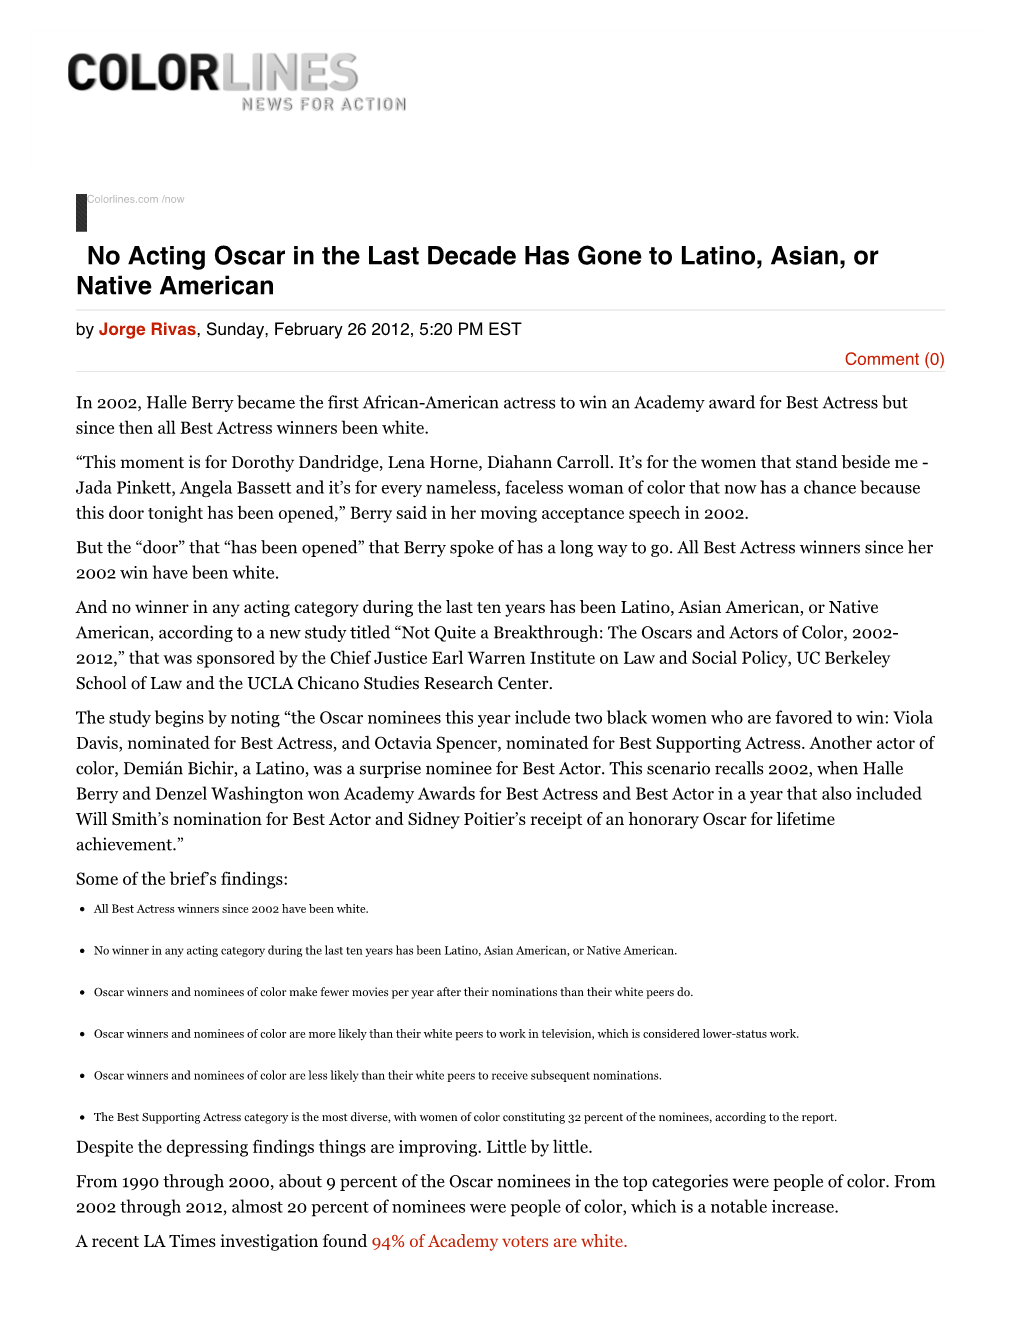 No Acting Oscar in the Last Decade Has Gone to Latino, Asian, Or Native American by Jorge Rivas, Sunday, February 26 2012, 5:20 PM EST Comment (0)